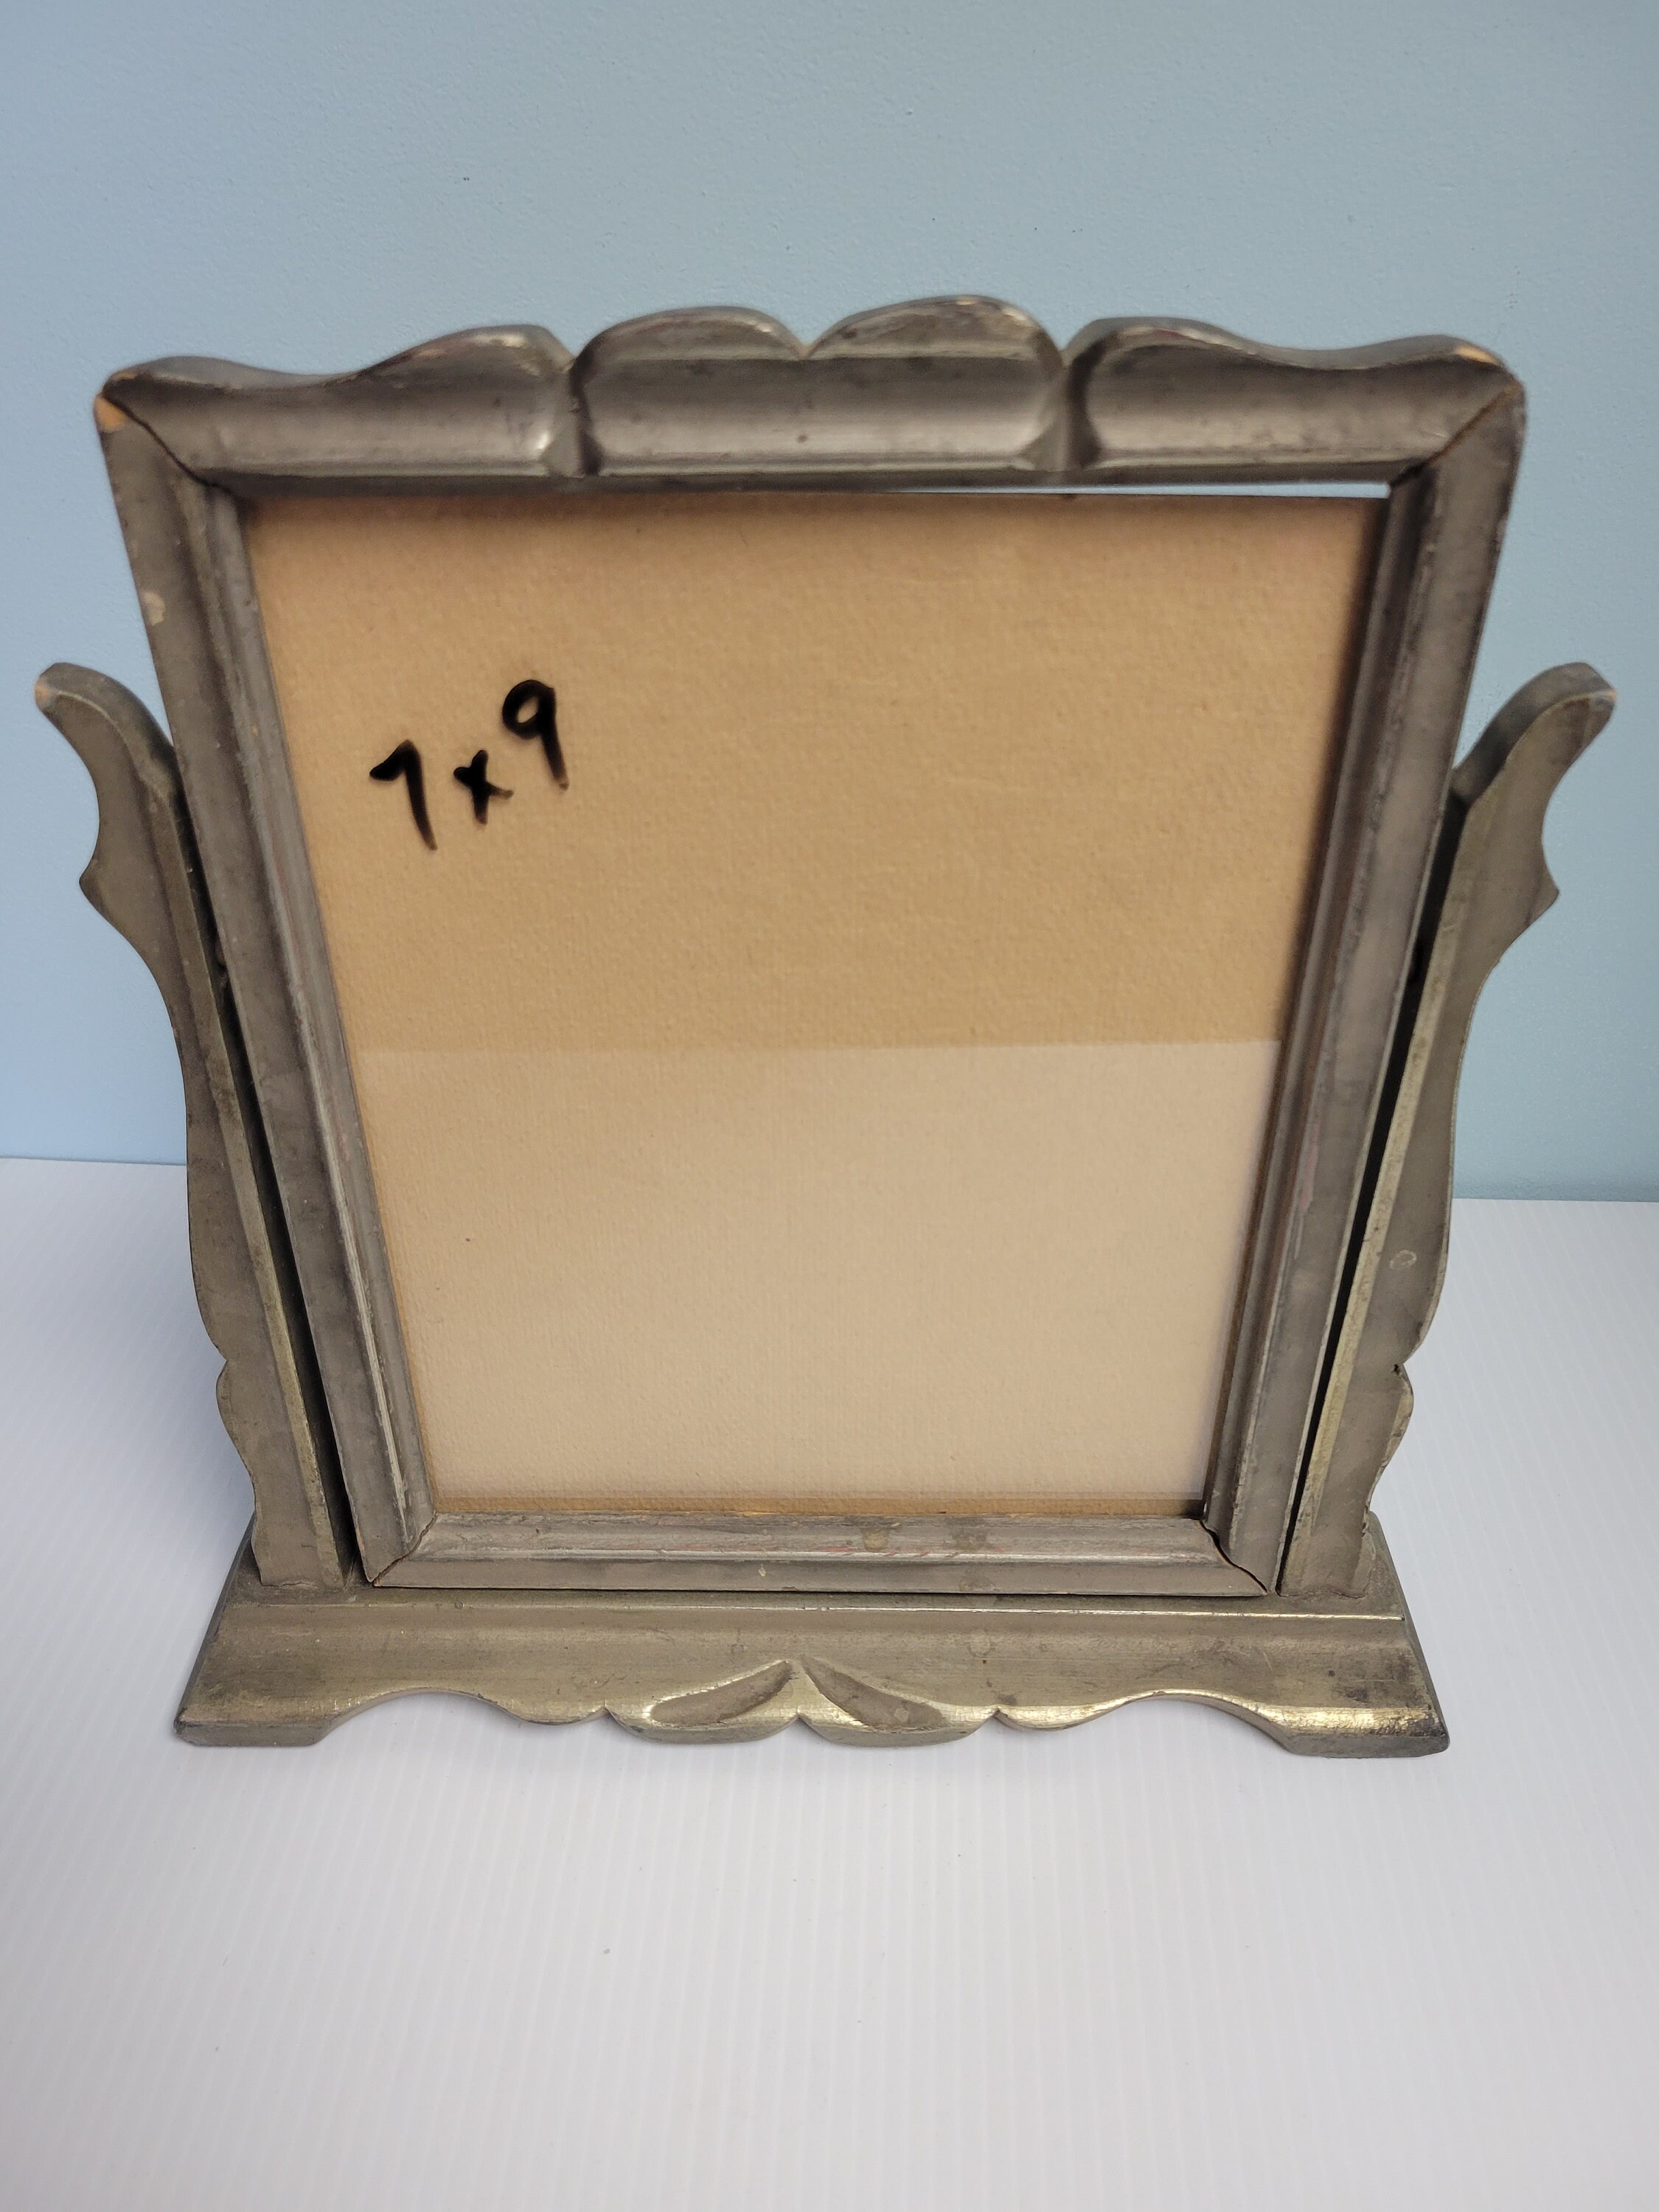 Vintage LARGE PICTURE Frame Glass Cover - 29 x 26